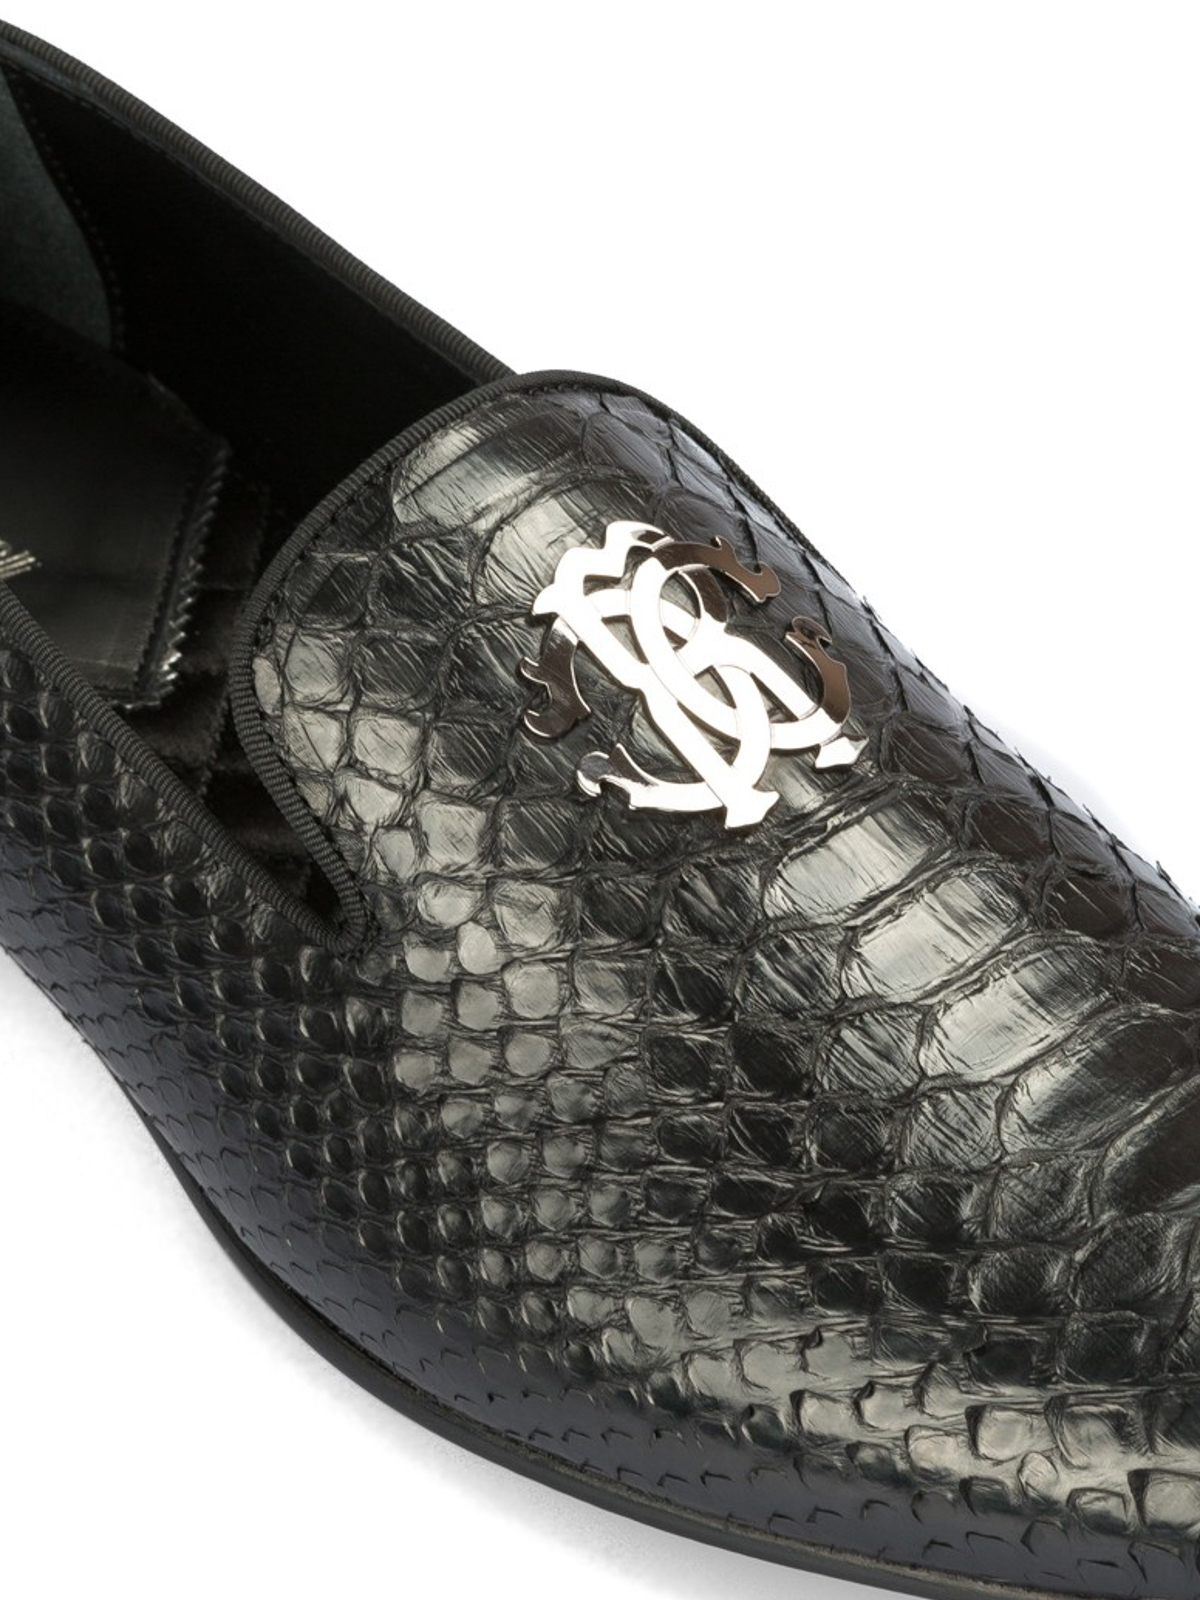 roberto cavalli loafer shoes